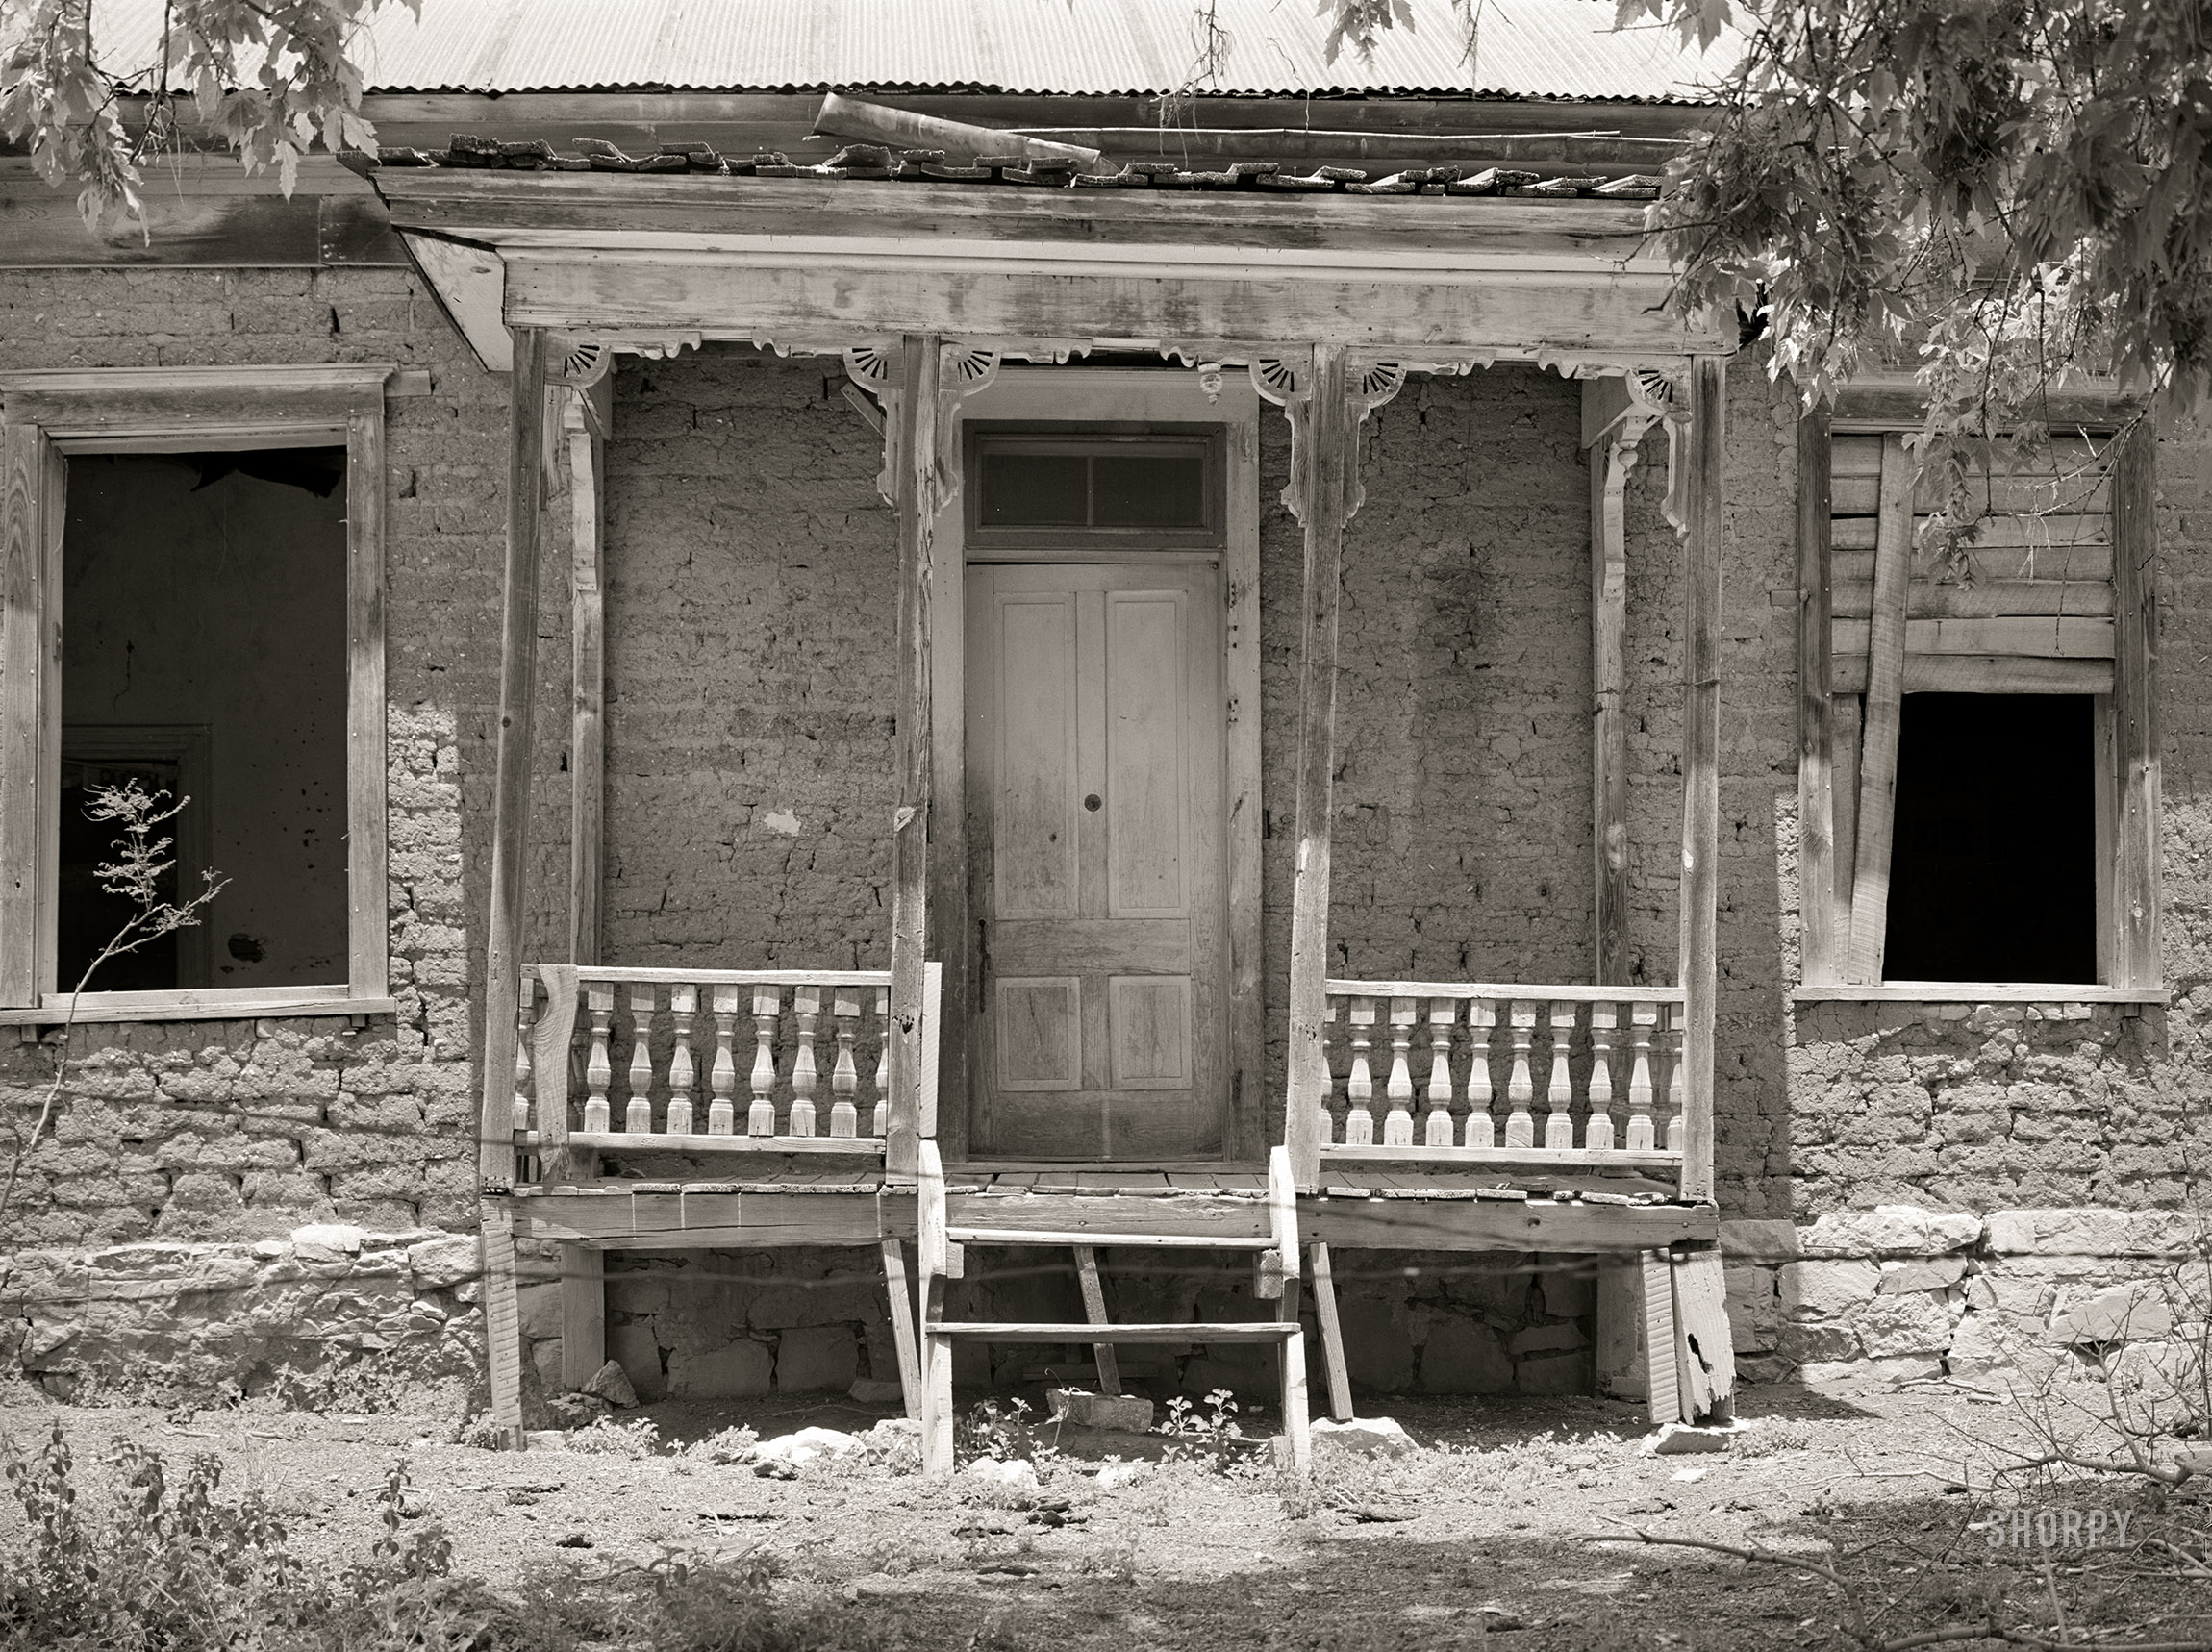 May 1940. "Front of abandoned residence in Georgetown, New Mexico. Ghost gold mining town." Acetate negative by Russell Lee for the Farm Security Administration. View full size.